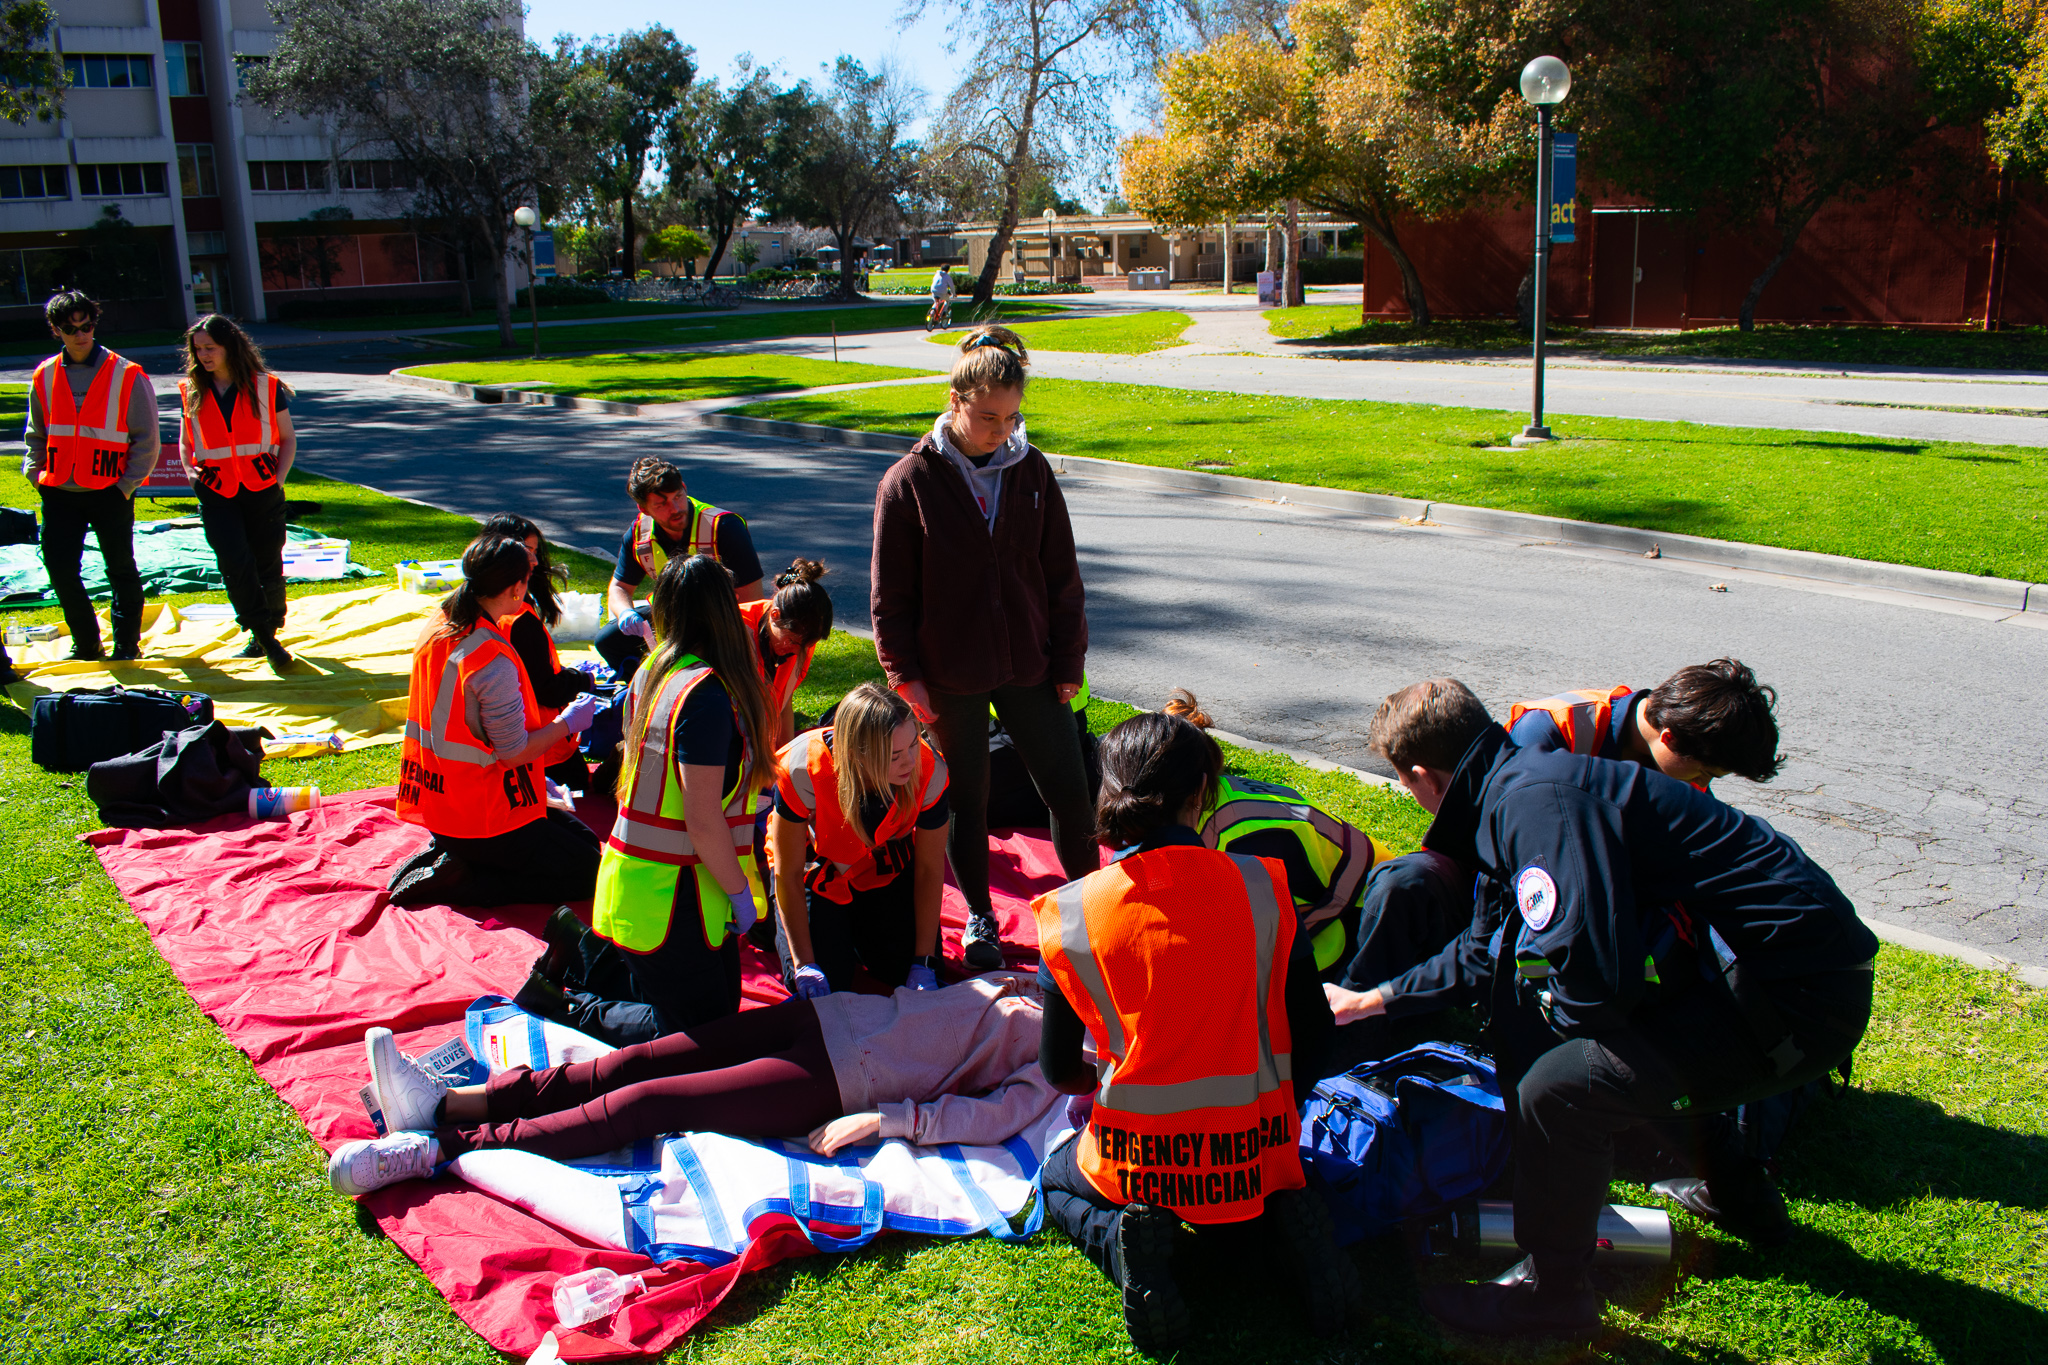 EMT Students working on the ground on "patients" laying on triage tarps